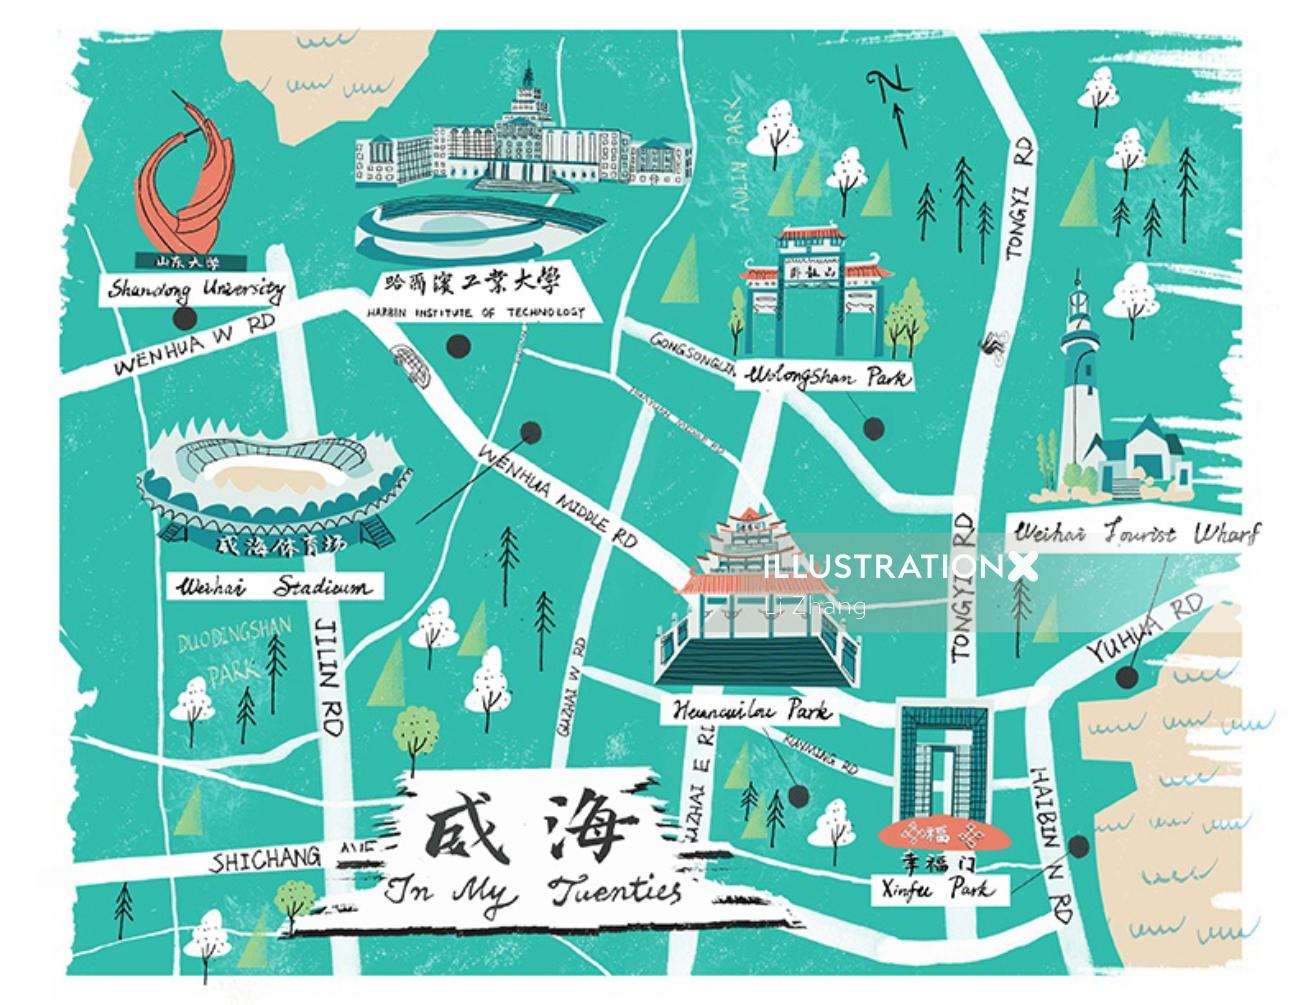 Illustration of the map of the City of Weihai